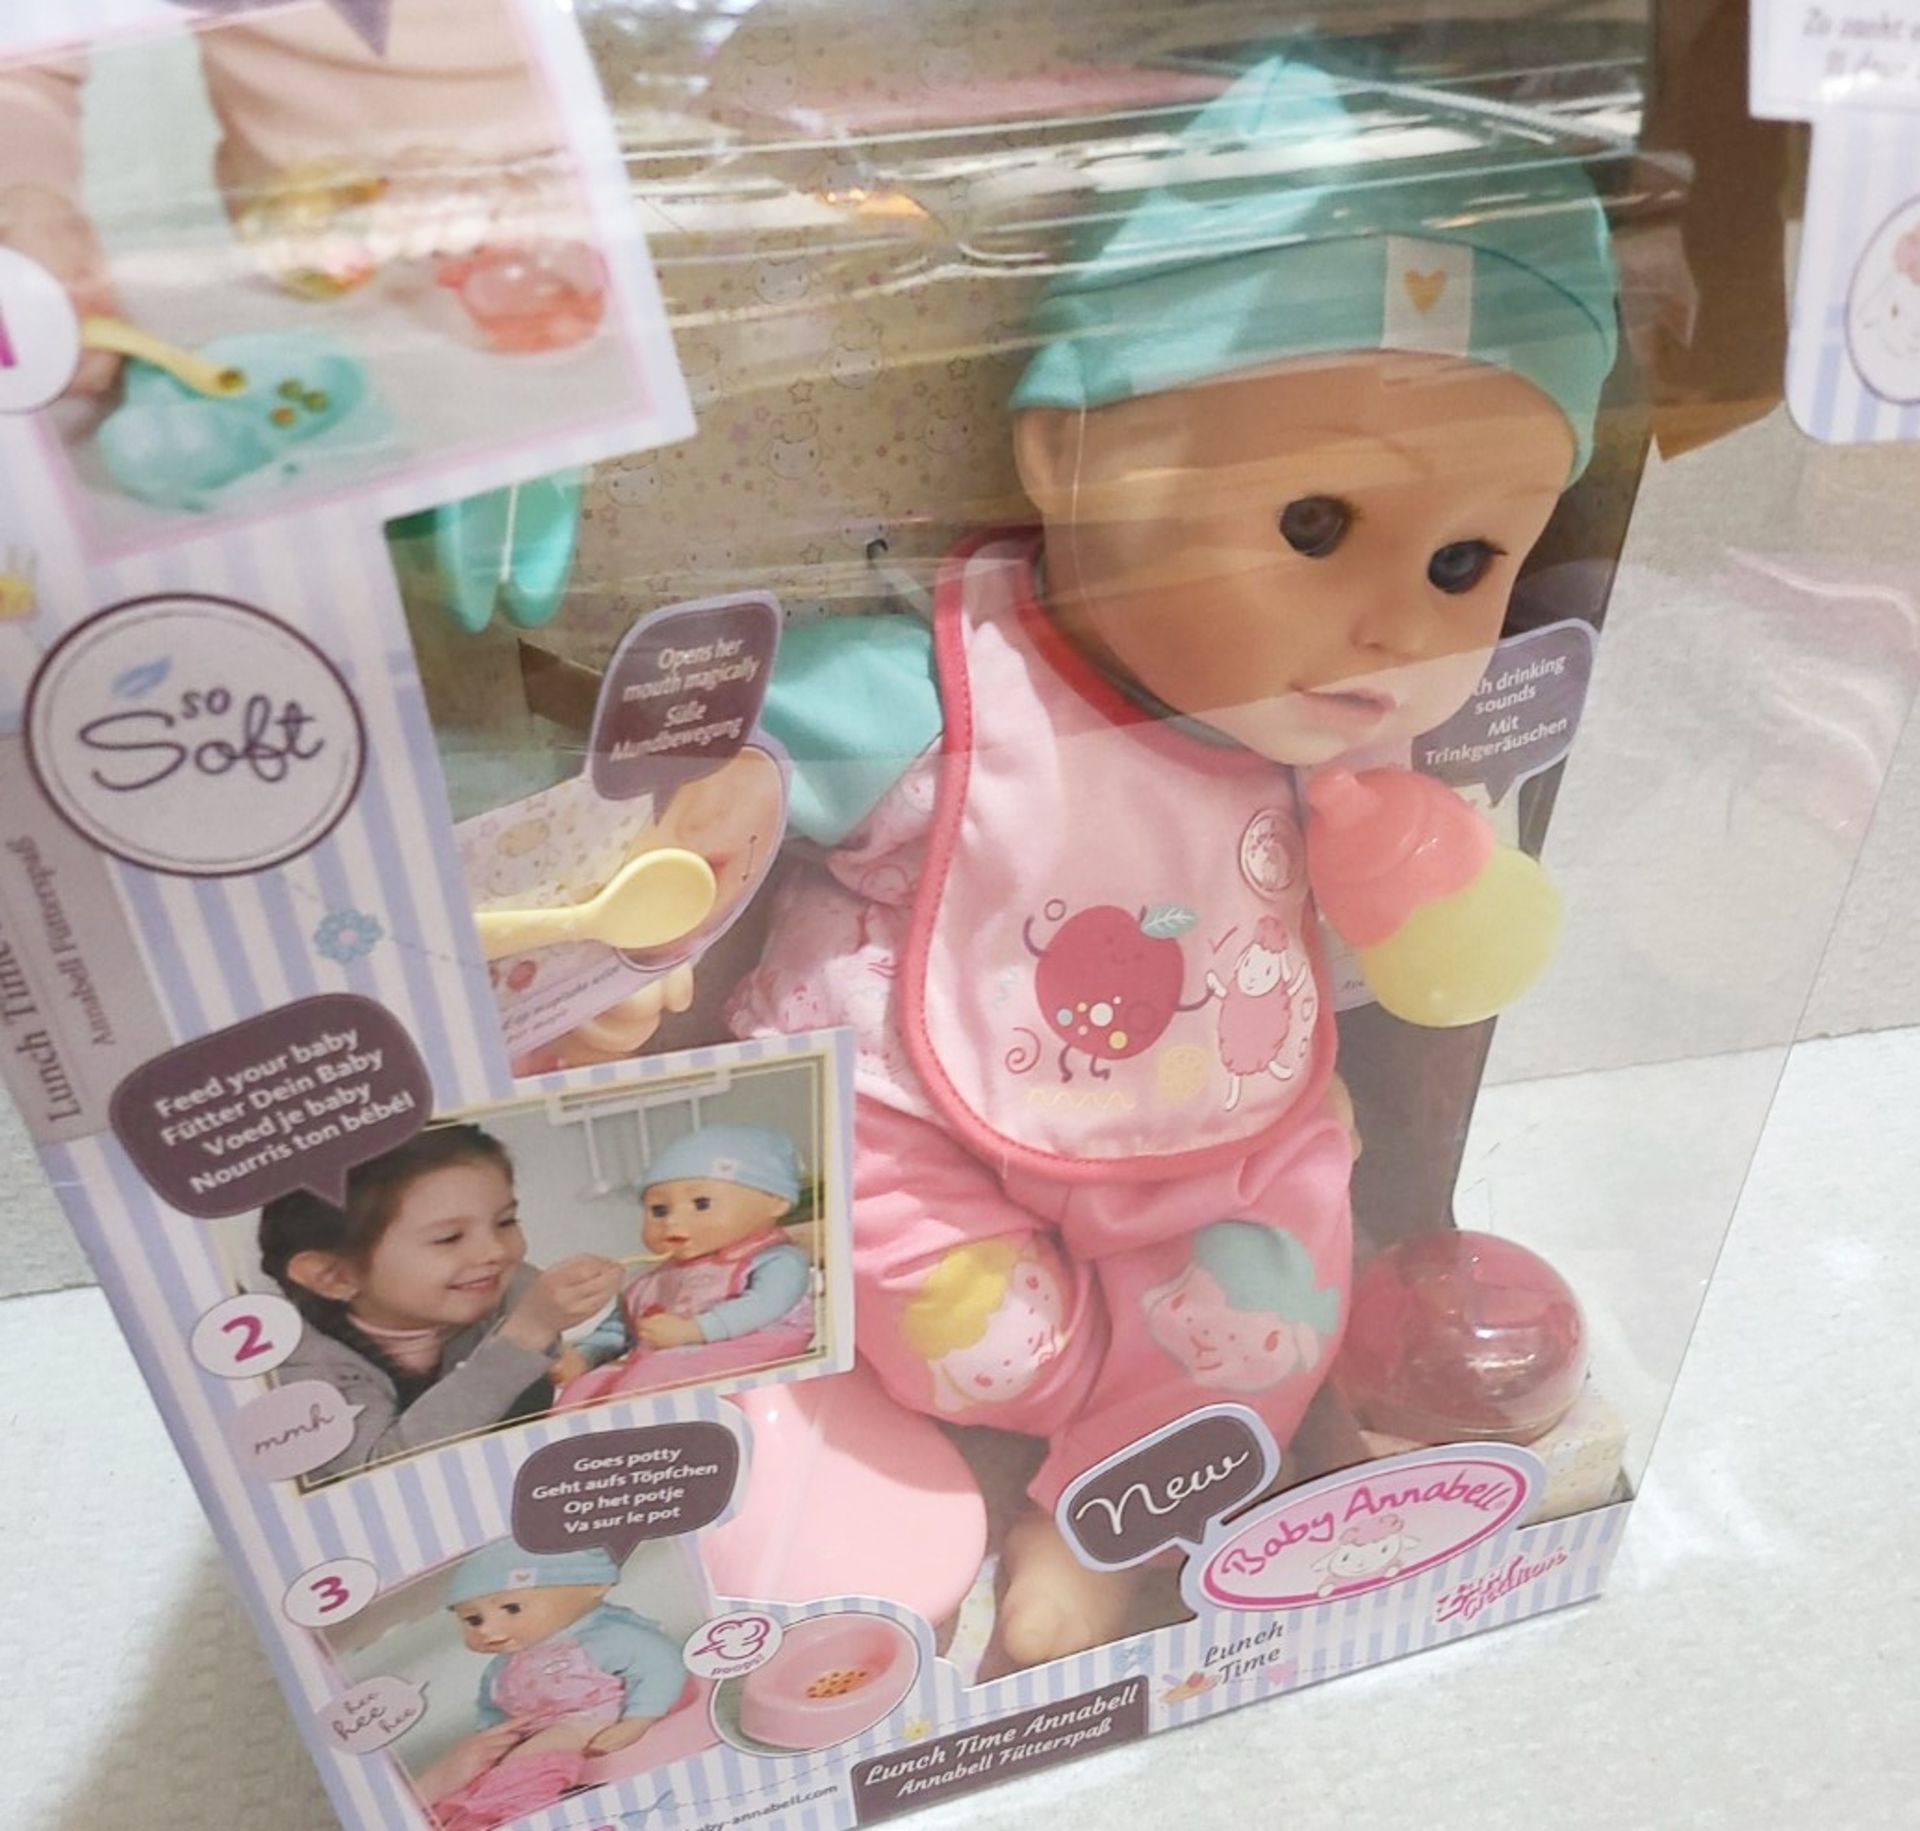 1 x BABY ANNABEL Lunchtime Baby With Accessories - Original Price £59.95 - Unused Boxed Stock - Ref: - Image 4 of 4